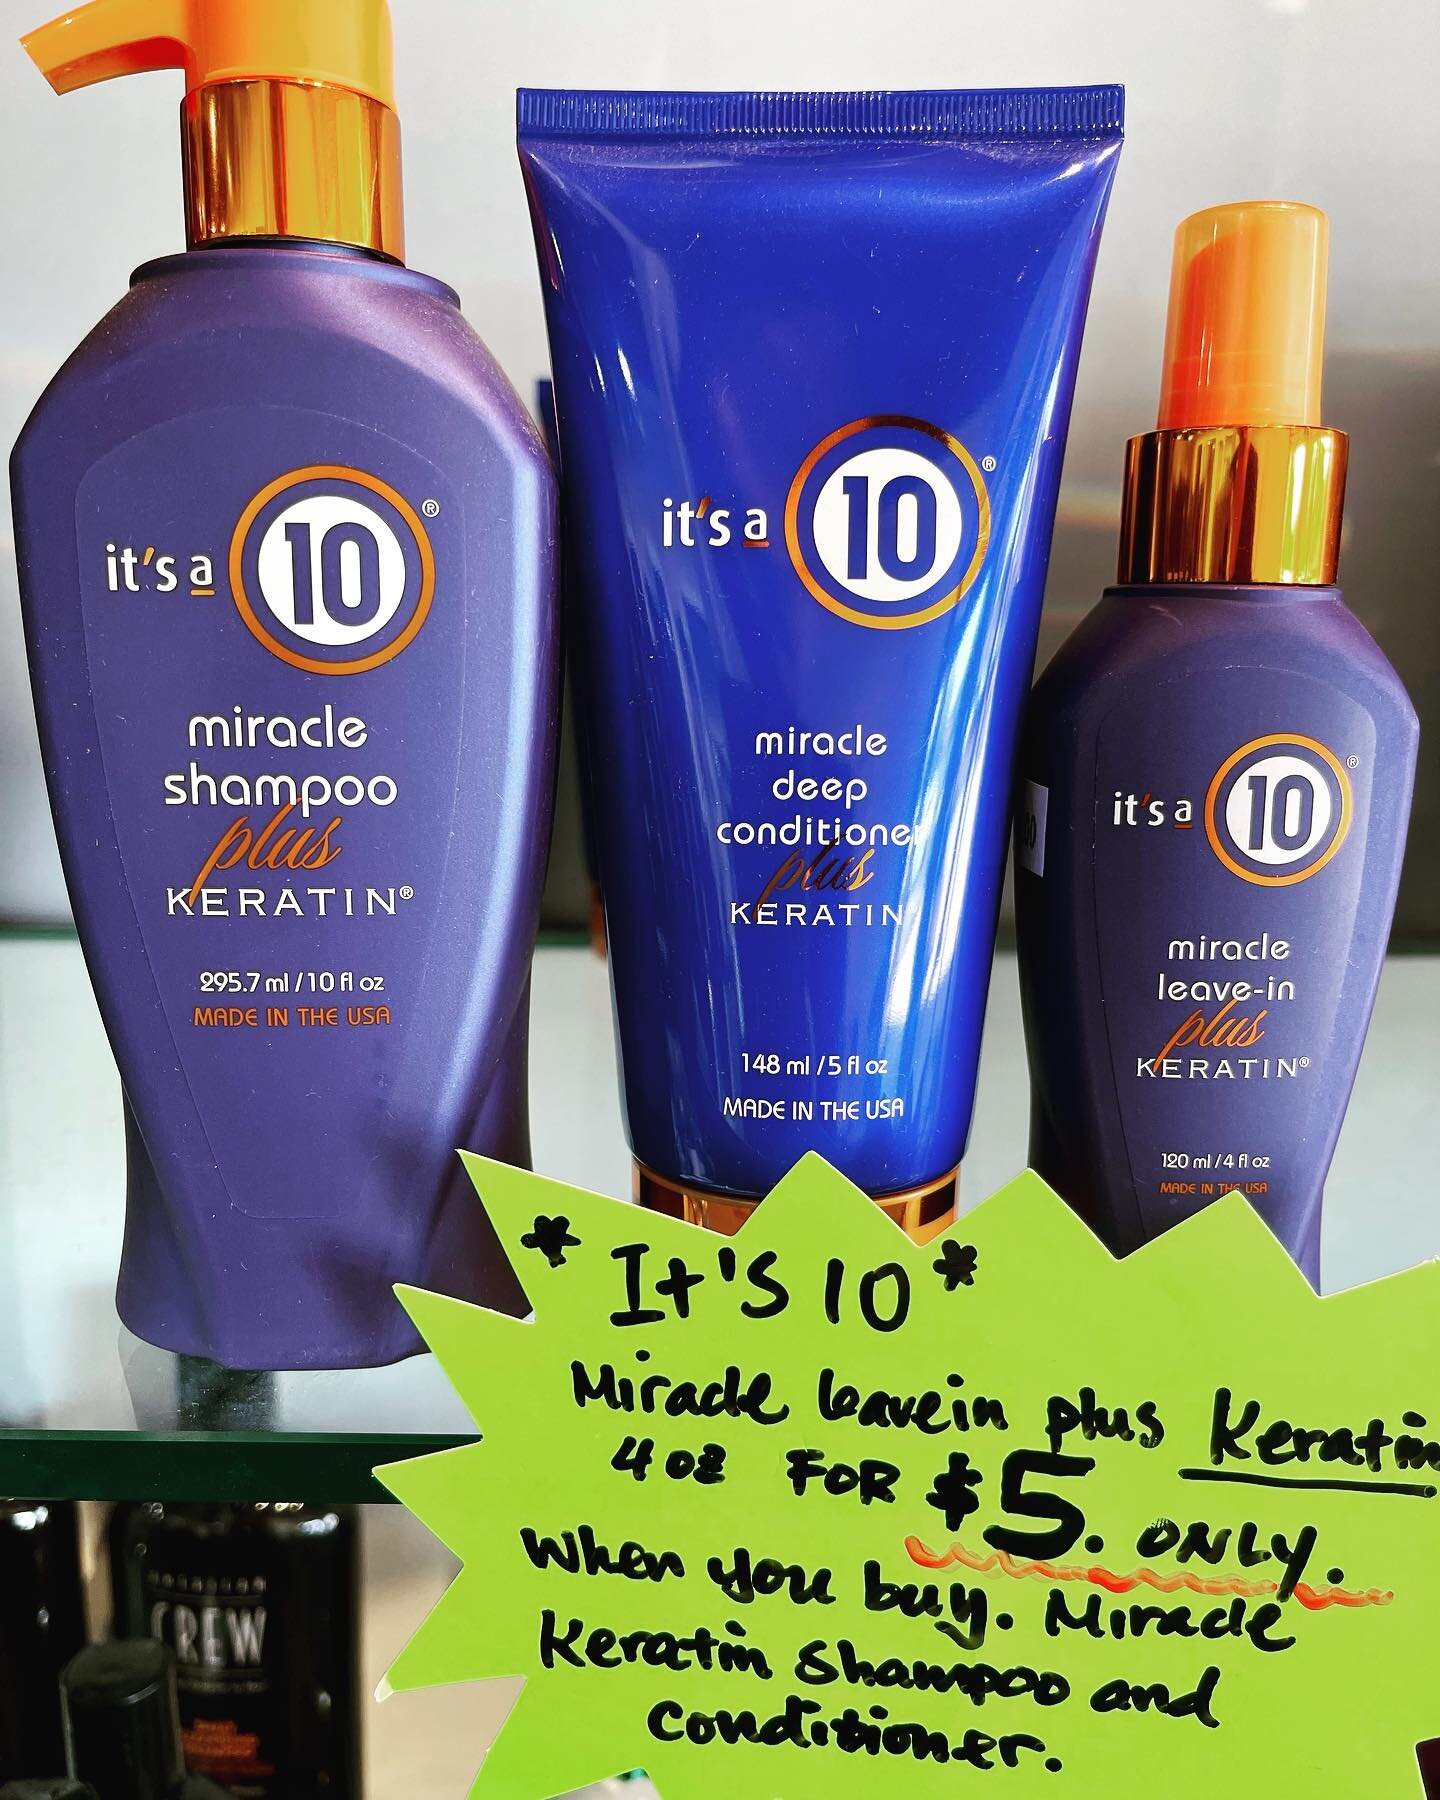 For ONLY $5 It&rsquo;s A 10 miracle leave-in plus keratin (4oz) when you buy It&rsquo;s A 10 miracle keratin shampoo and conditioner together.